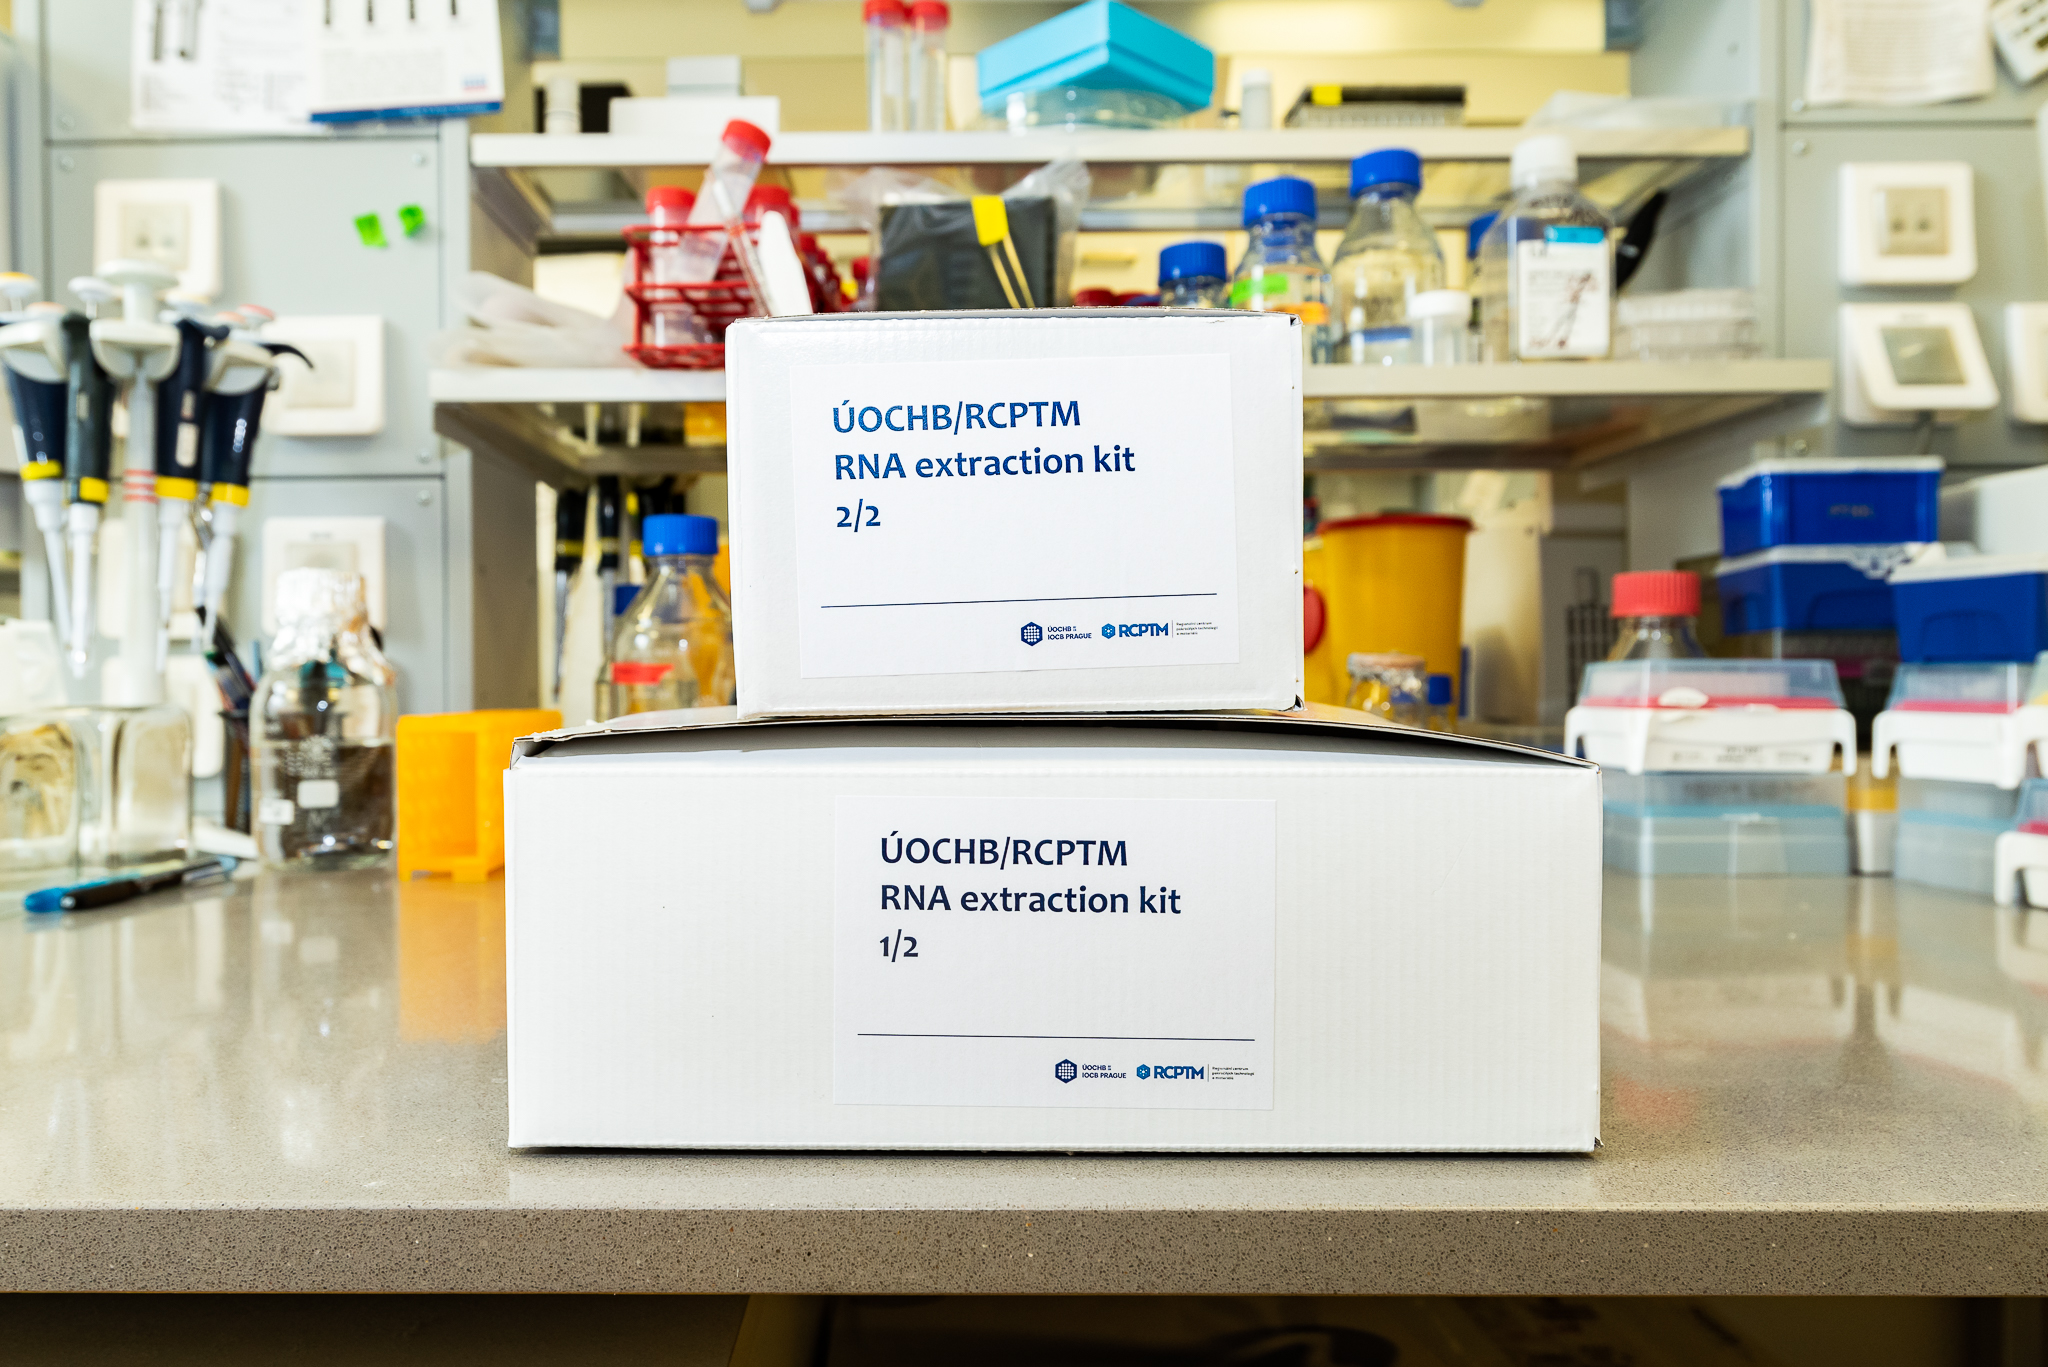 IOCB Tech donated kits for 10,000 isolations of viral RNA for COVID-19 testing to PHI Ostrava. Photo: Tomáš Belloň / IOCB Prague